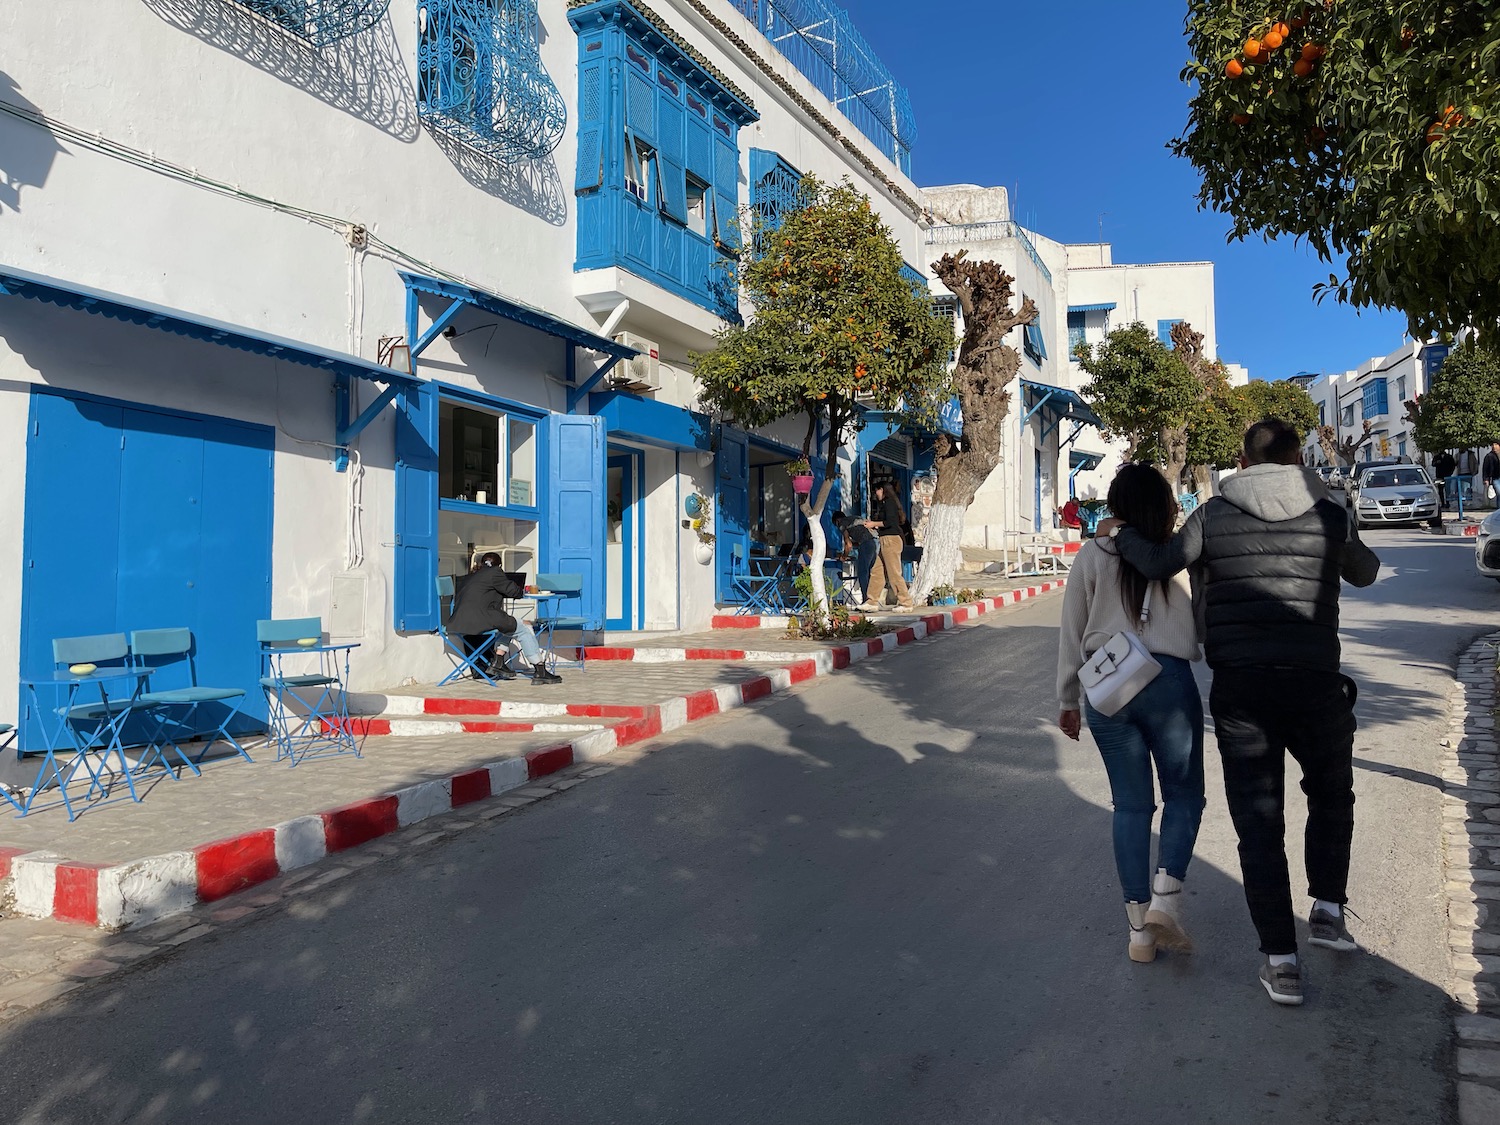 people walking down a street with blue and white buildings